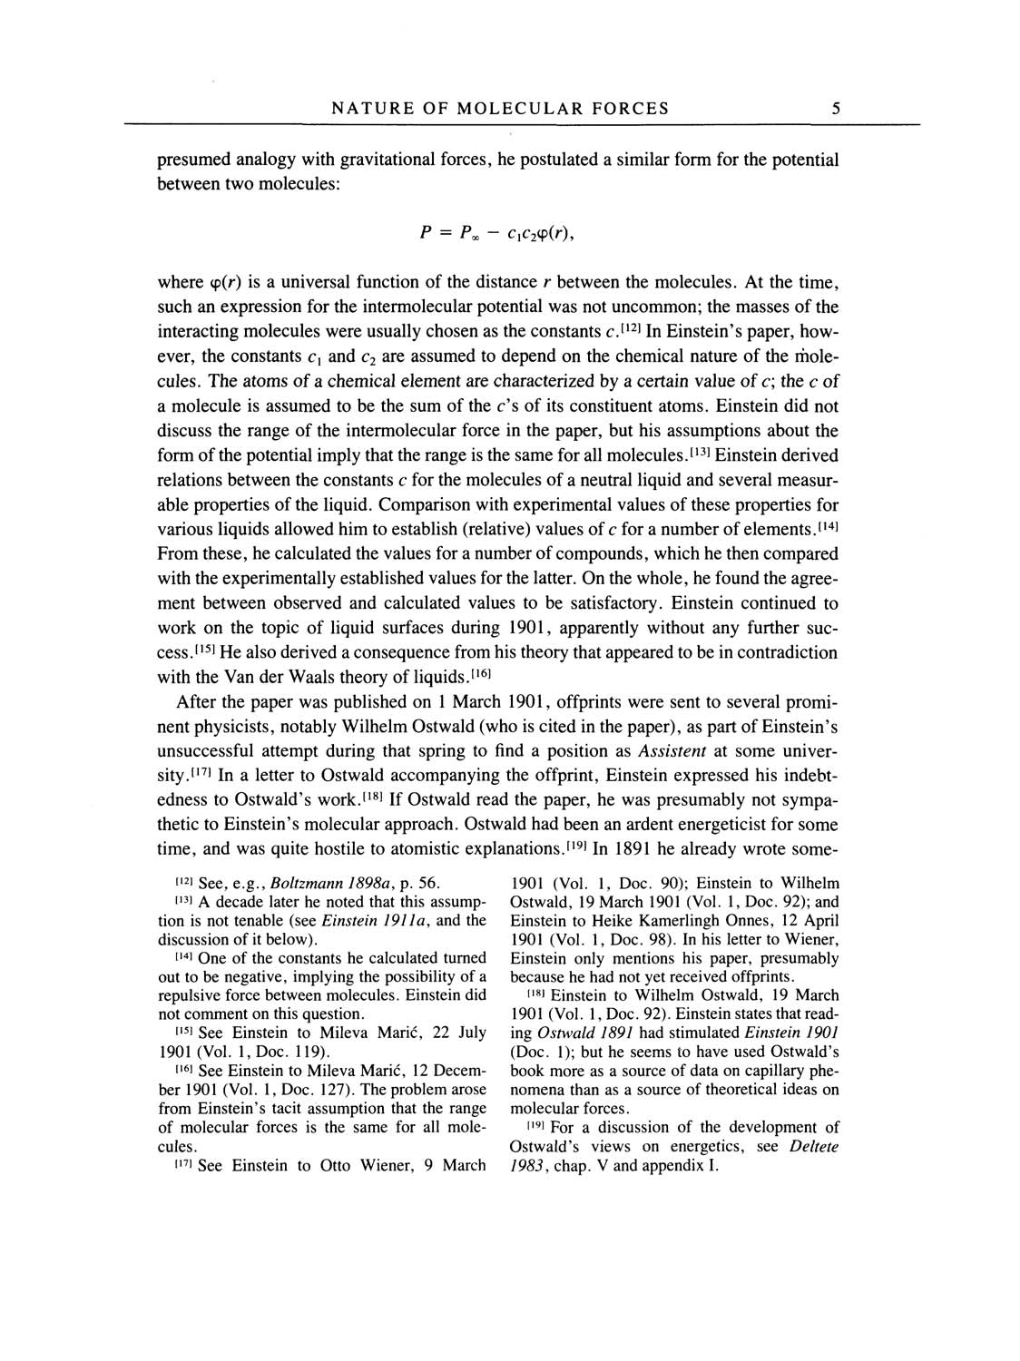 Volume 2: The Swiss Years: Writings, 1900-1909 page 5